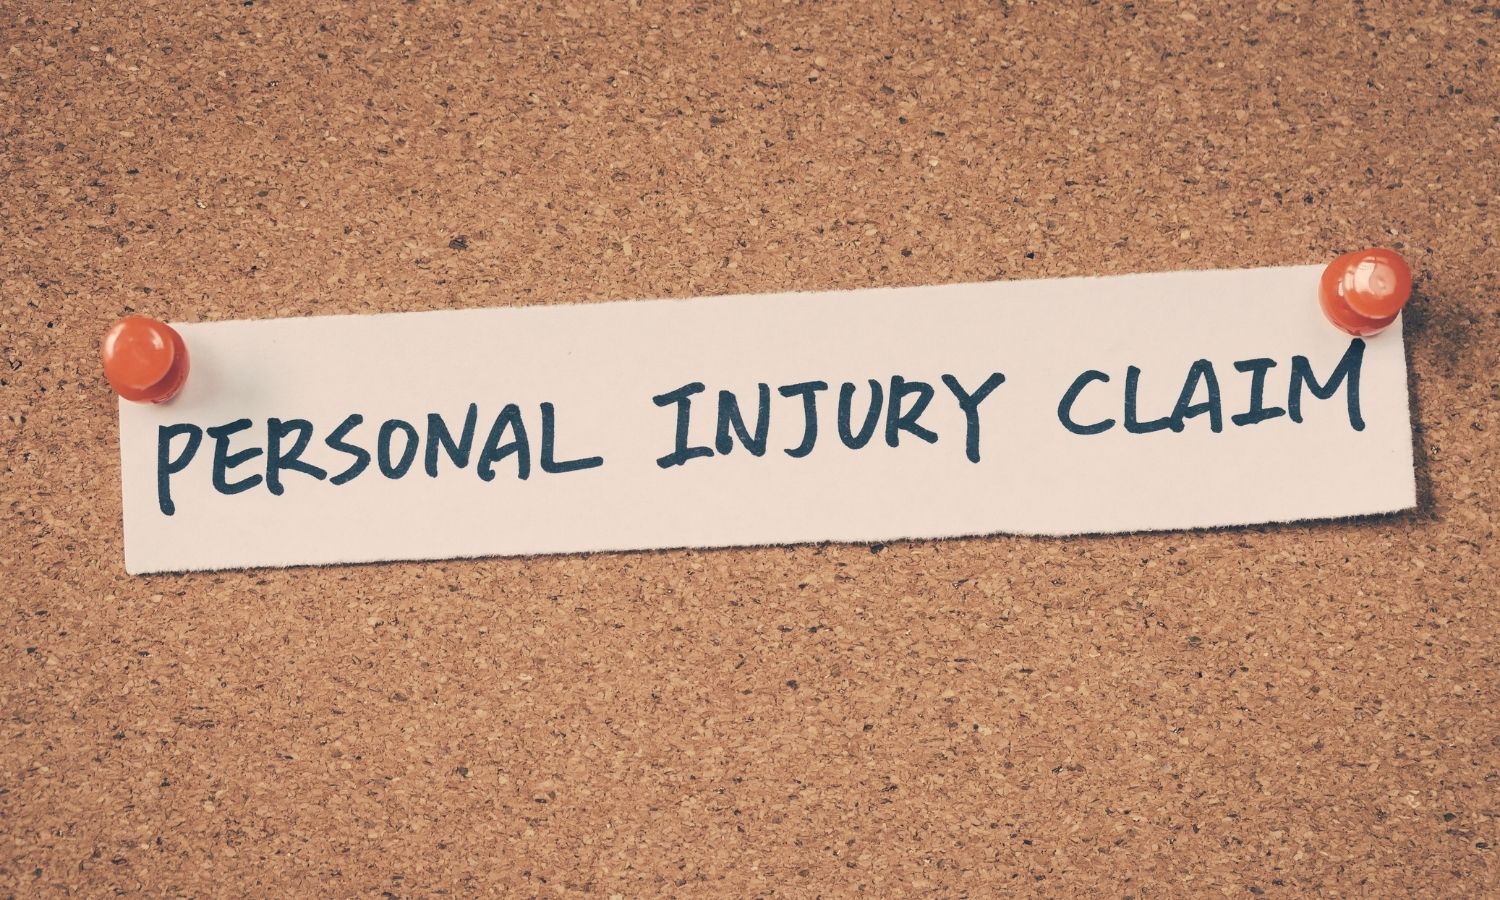 How do solicitors get paid when you pursue a personal injury claim?